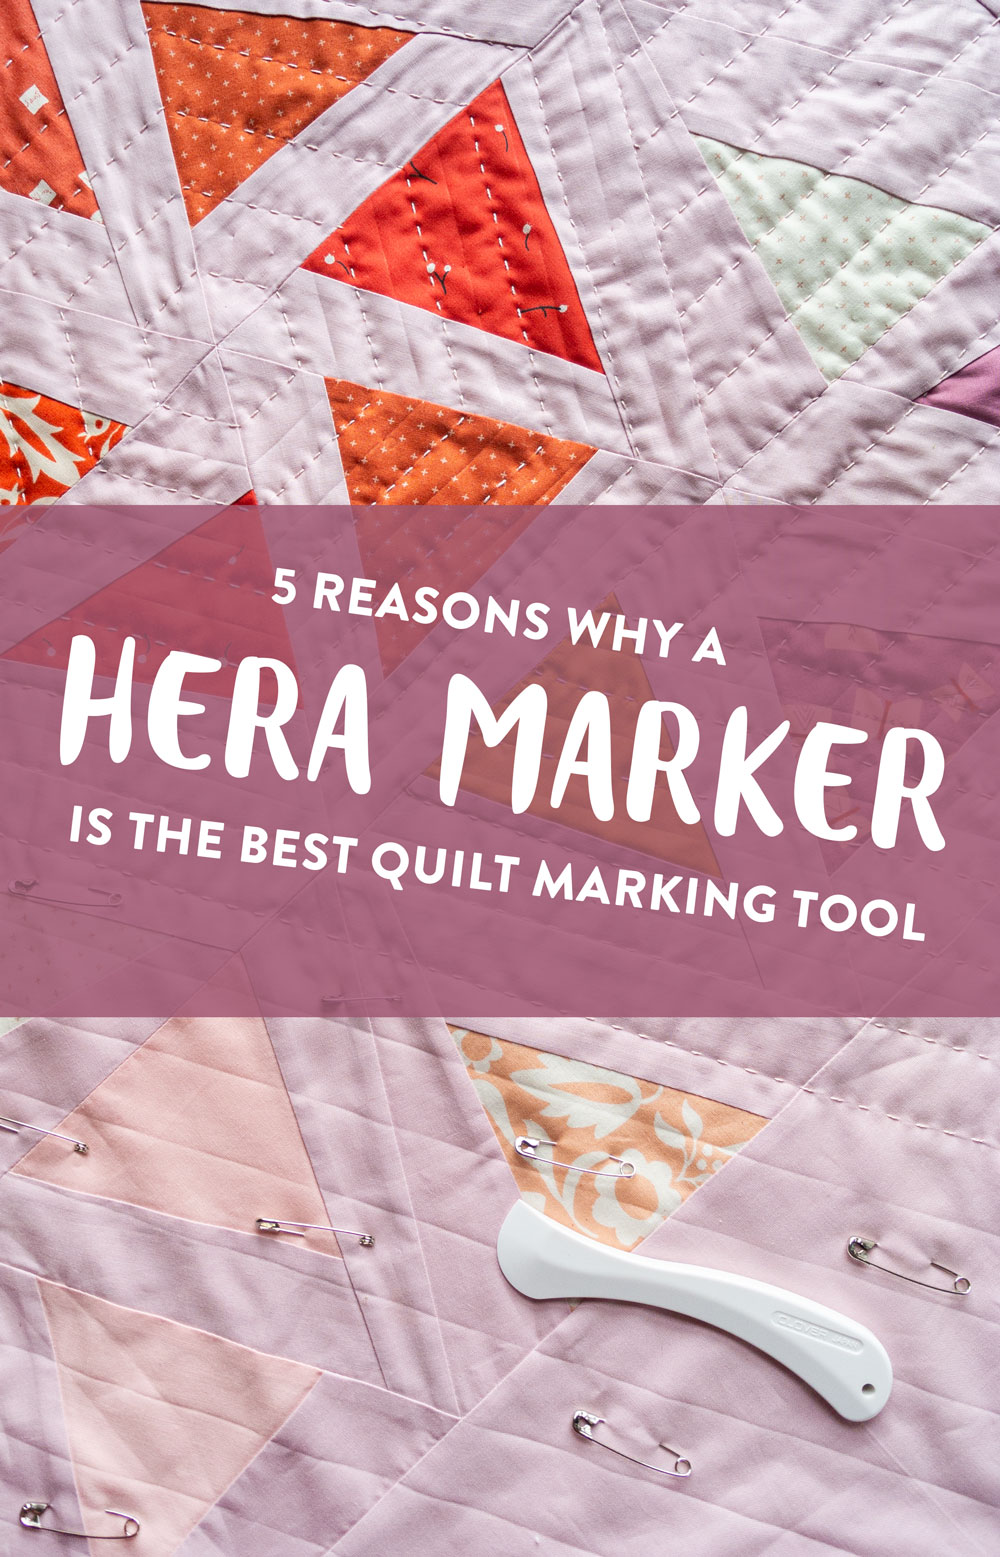 A hera marker is ideal for marking guide lines on your quilt because it only makes creases and not actual marks. Watch a video tutorial on how to use it! SuzyQuilts.com #quiltingtips #quiltingtools